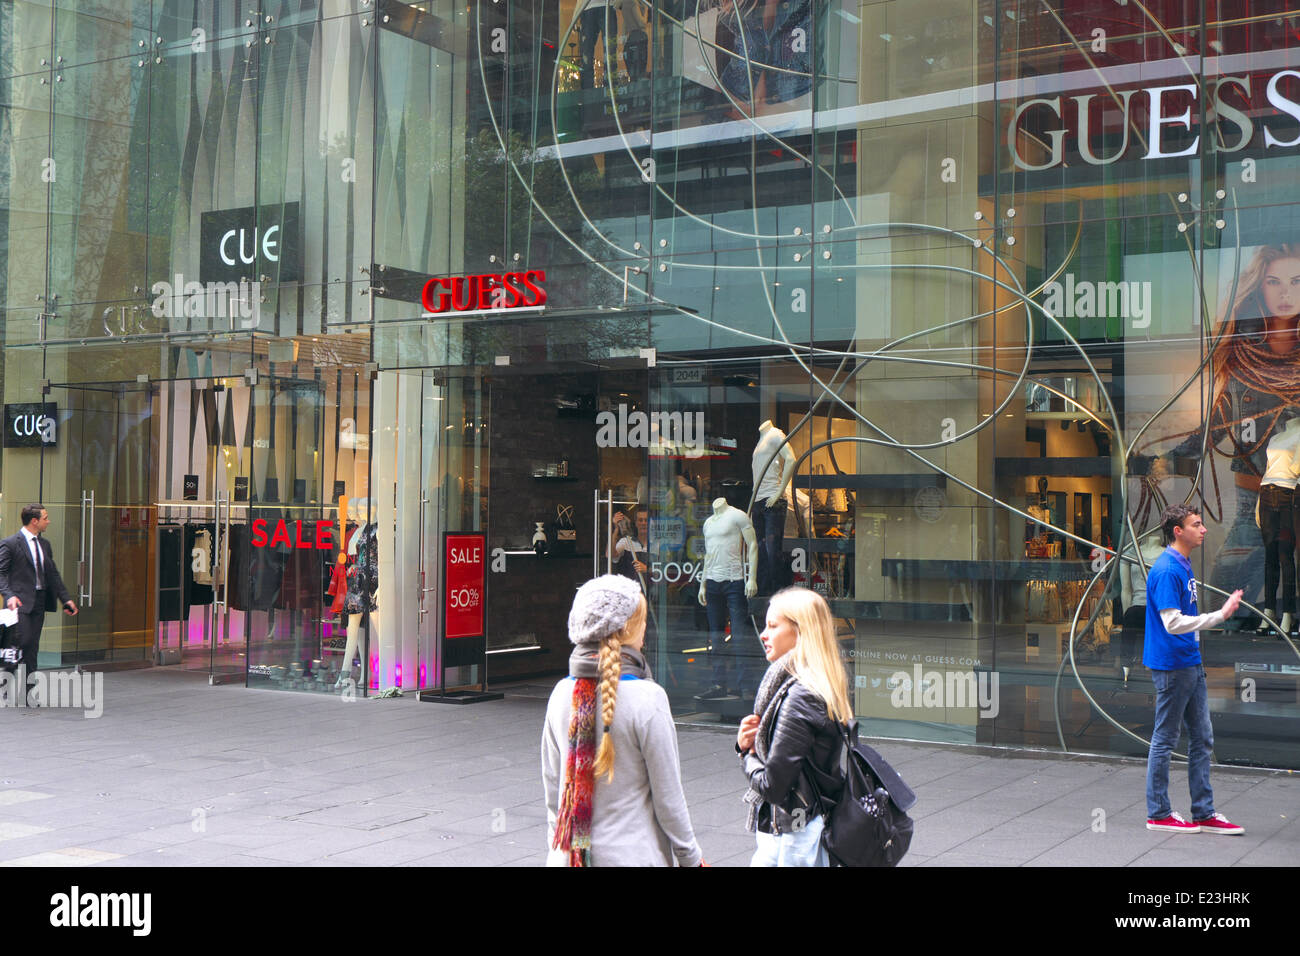 Guess and Cue retail fashion stores in pitt street,sydney,new south wales, australia Stock Photo - Alamy